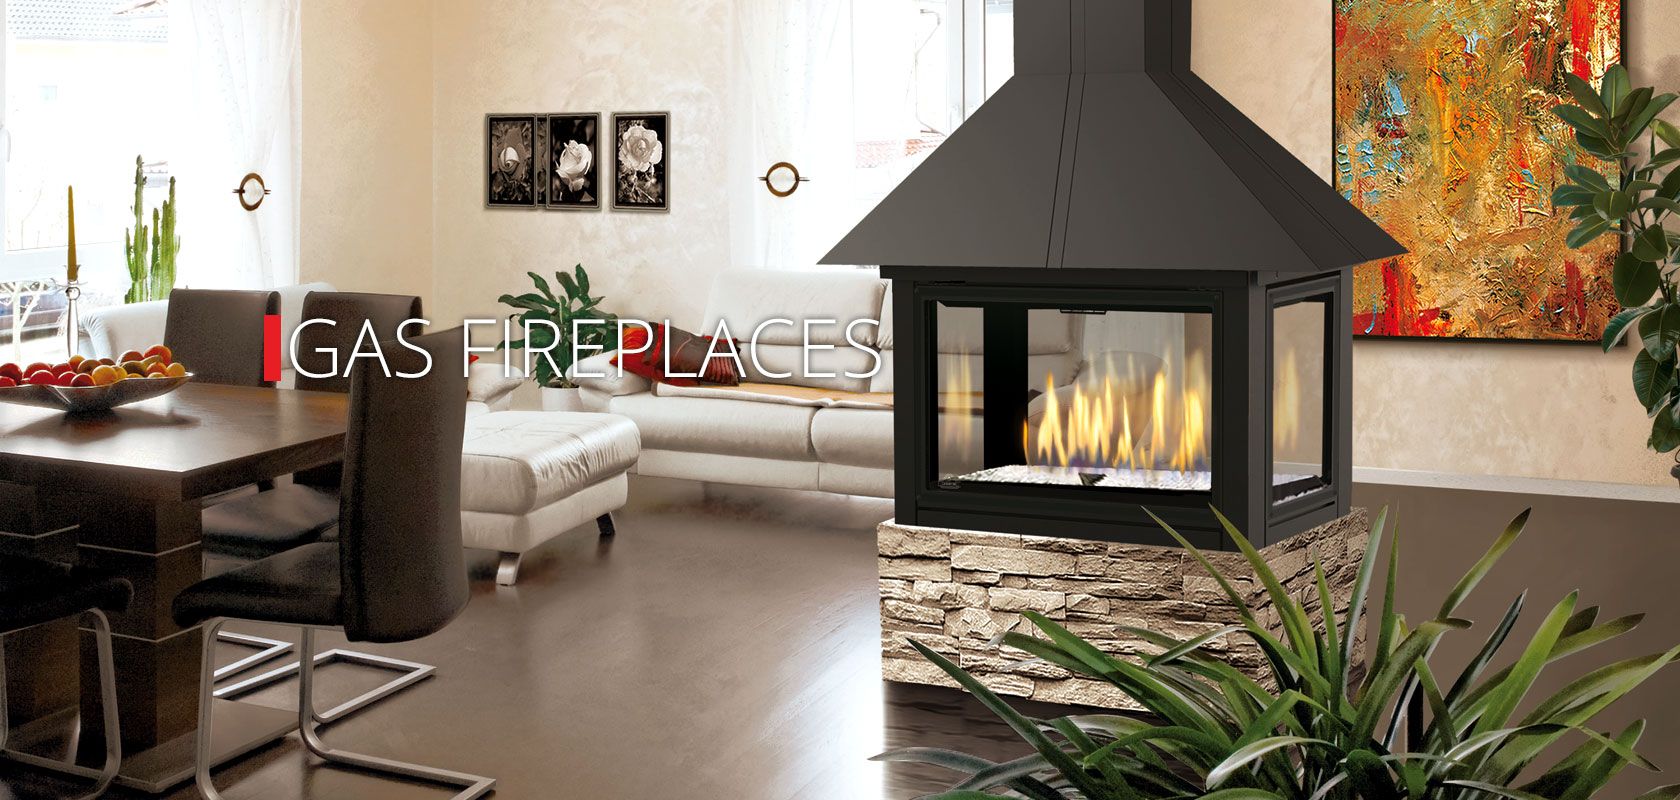 Gas Fireplaces for Sale Inspirational Gas Fireplaces J A Roby Inc Small House Plans